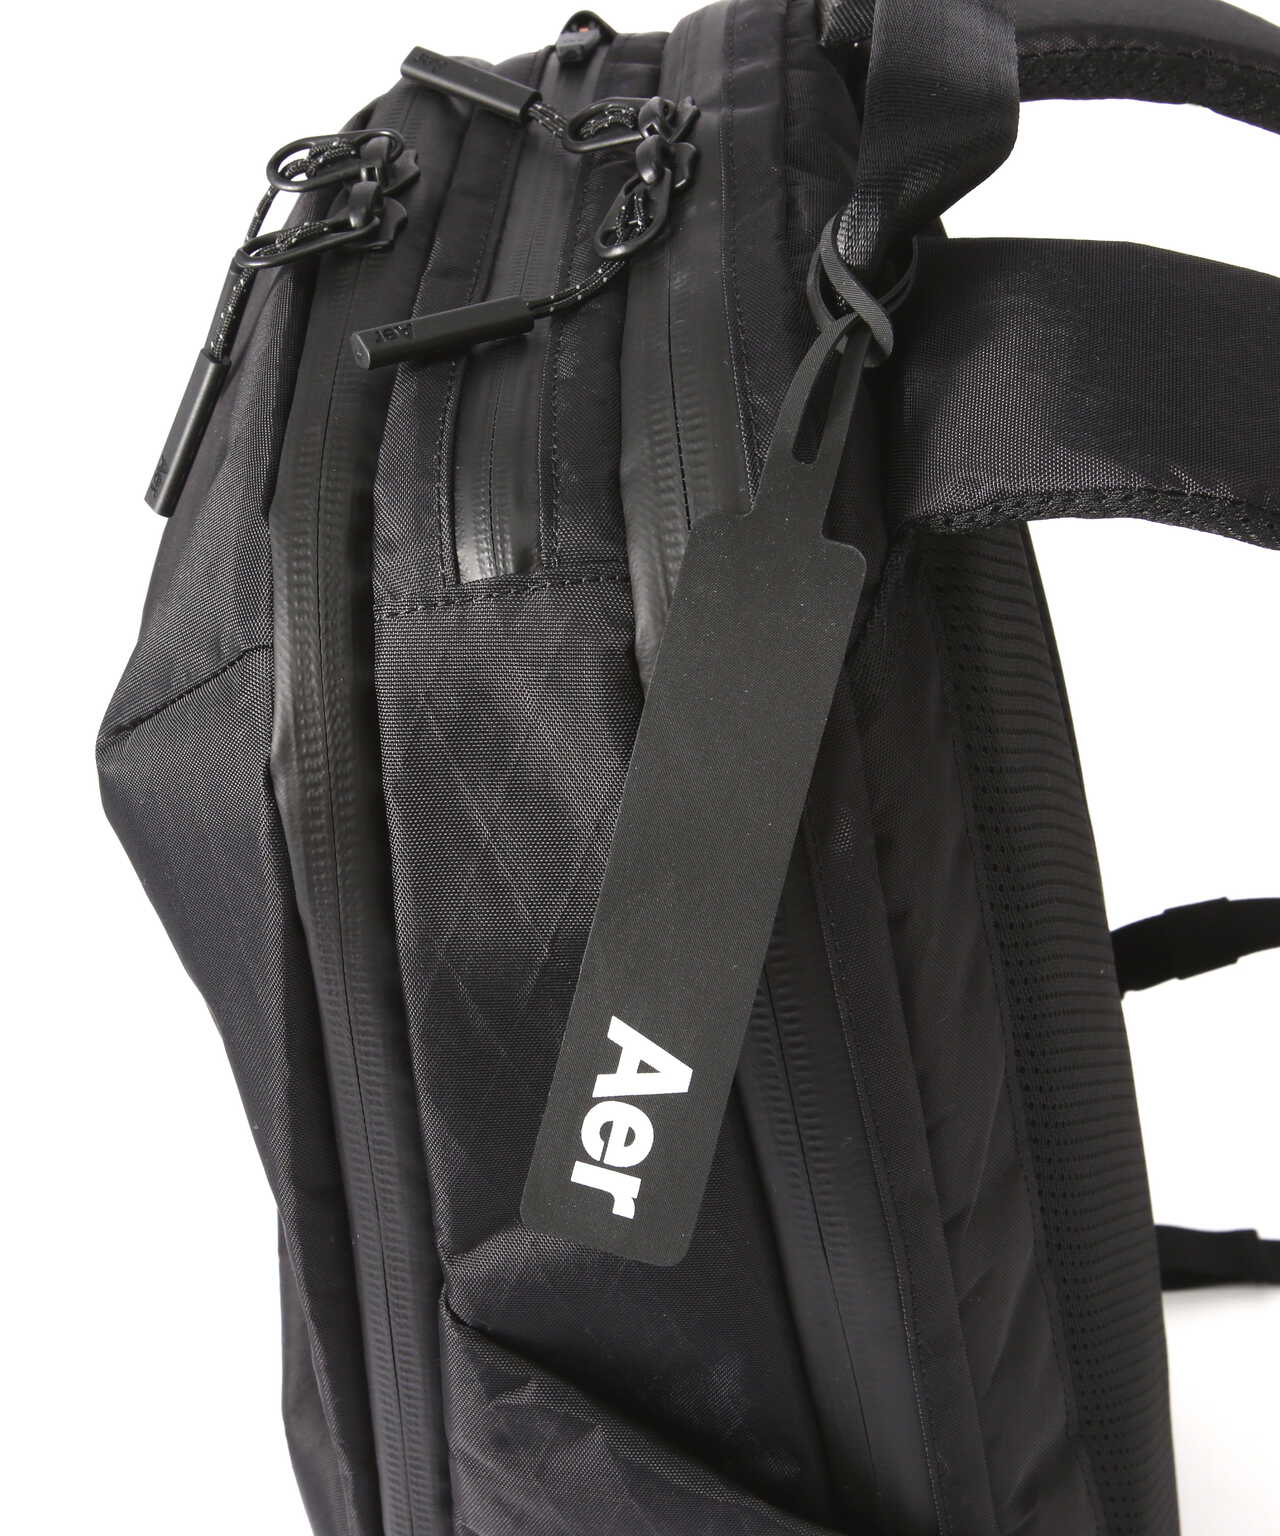 Aer（エアー）Day Pack2 X-PAC AER-91008 高耐水・高耐久バッグ 正規 ...